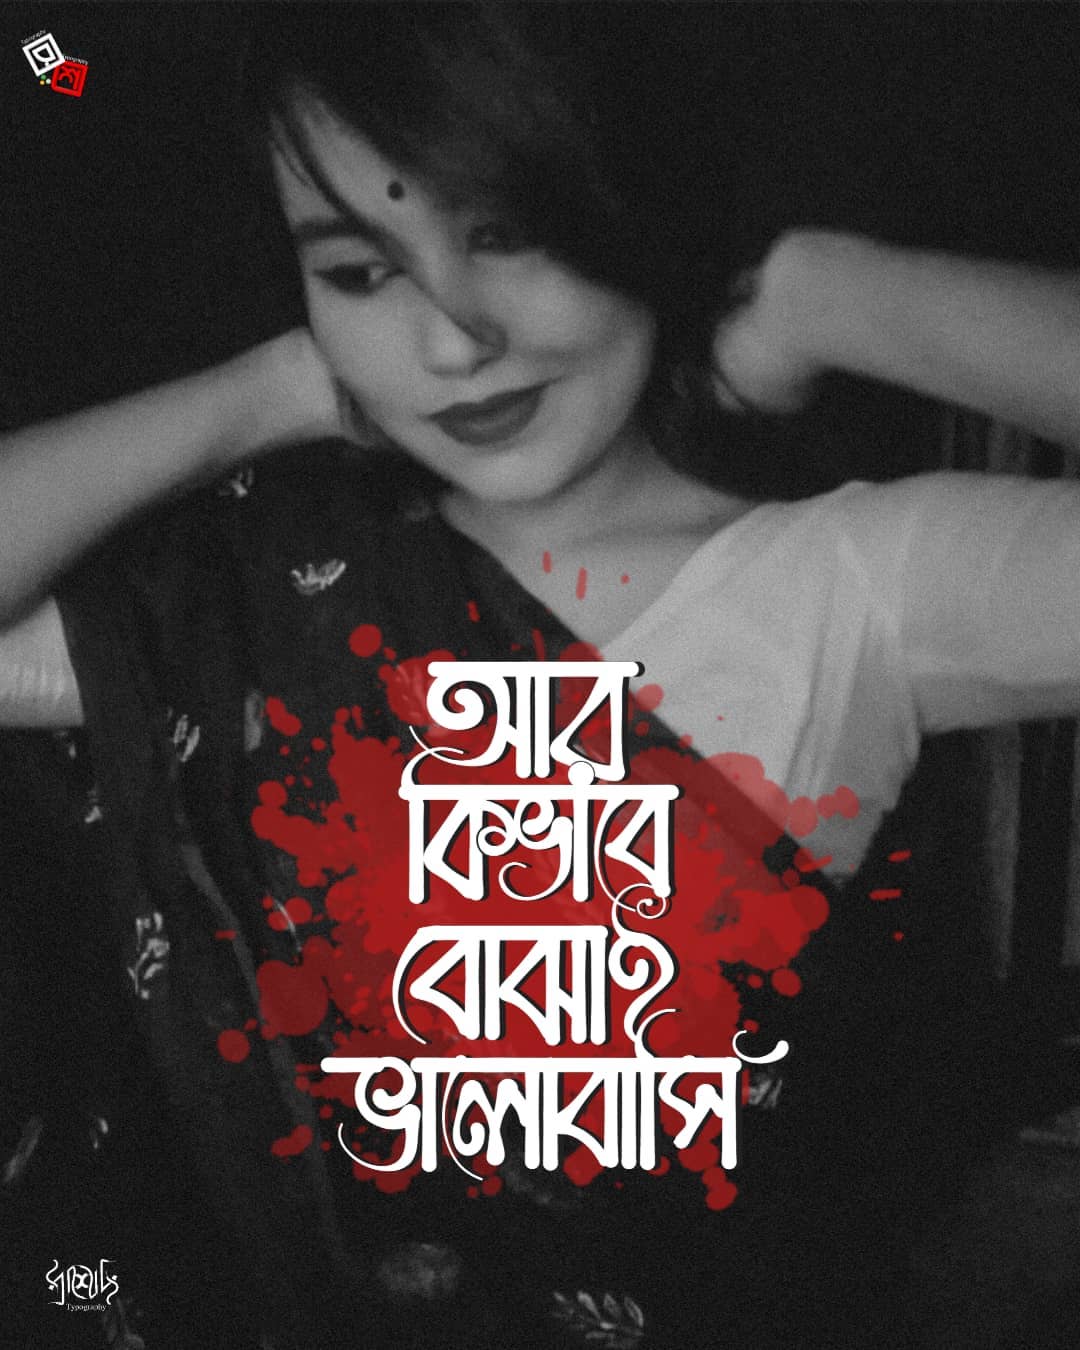 Bengali Quotes with Girl DP for WhatsApp Status